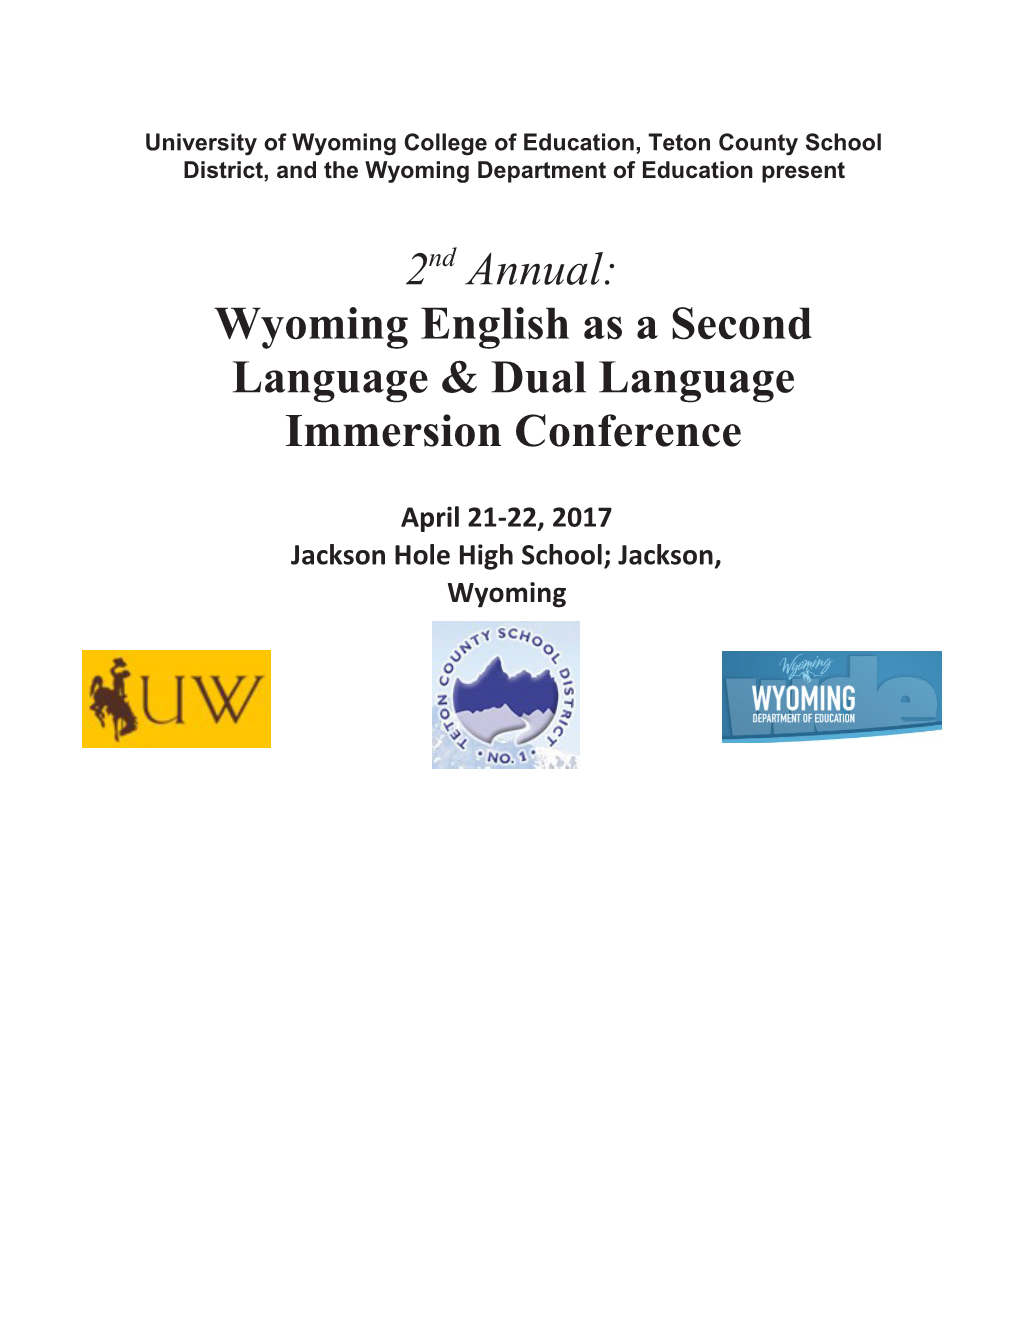 Wyoming English As a Second Language & Dual Language Immersion Conference